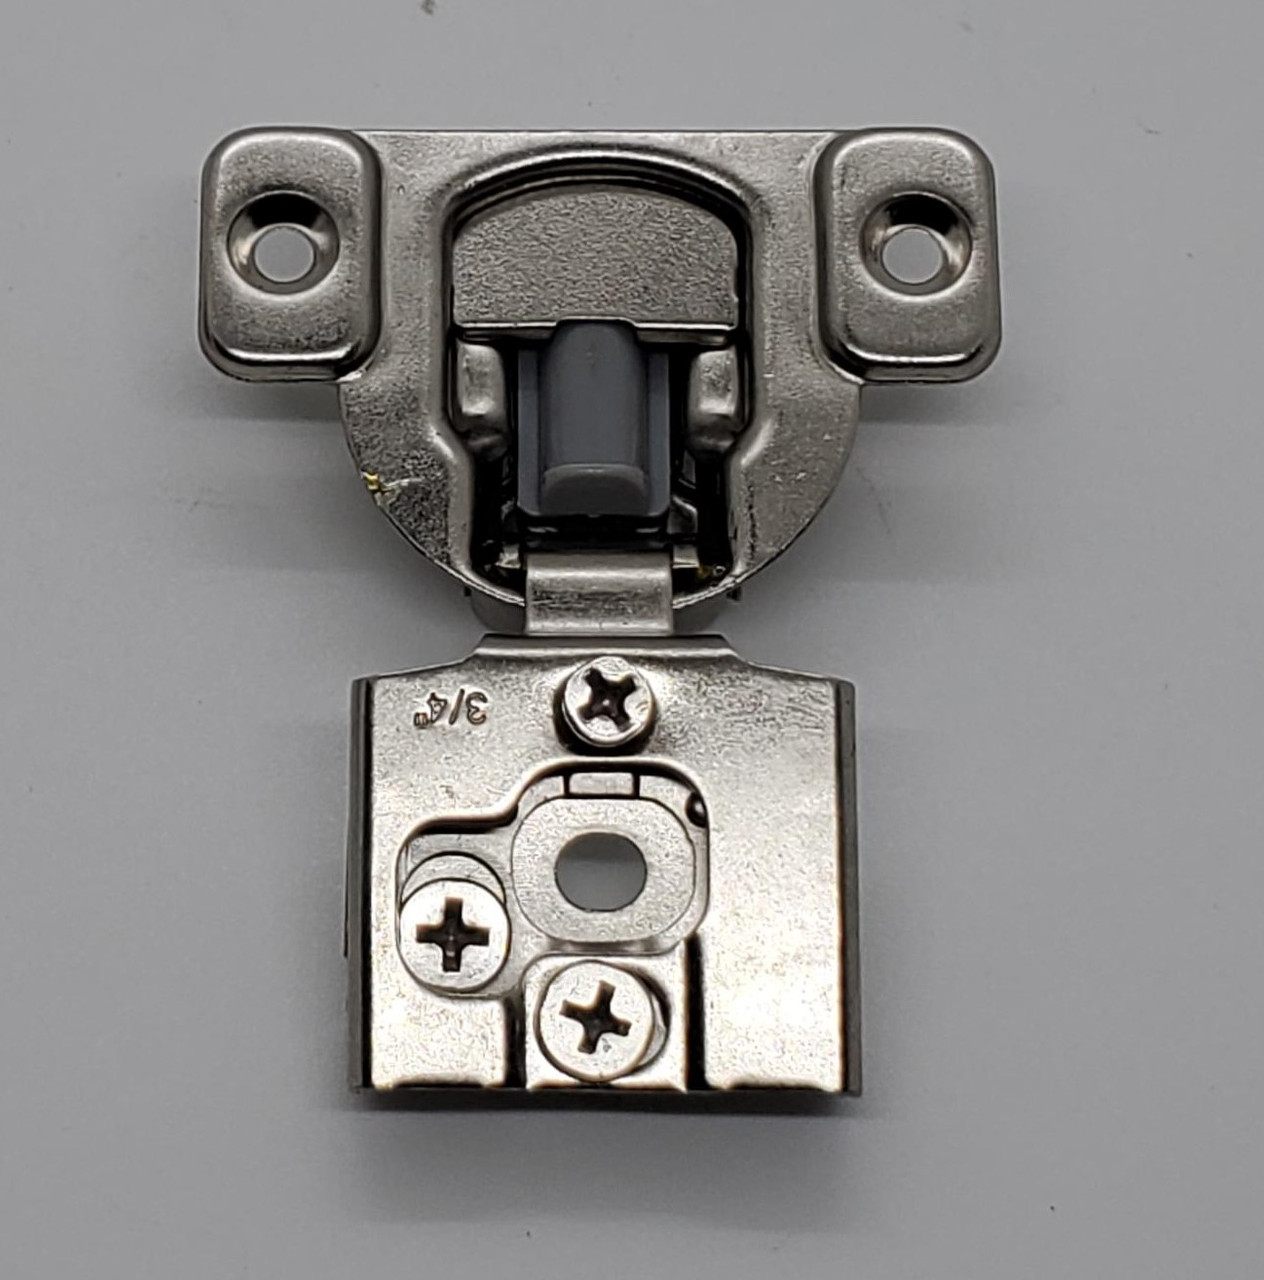 3/4" overlay Face Frame 105° Compact Cabinet Hinge, soft close